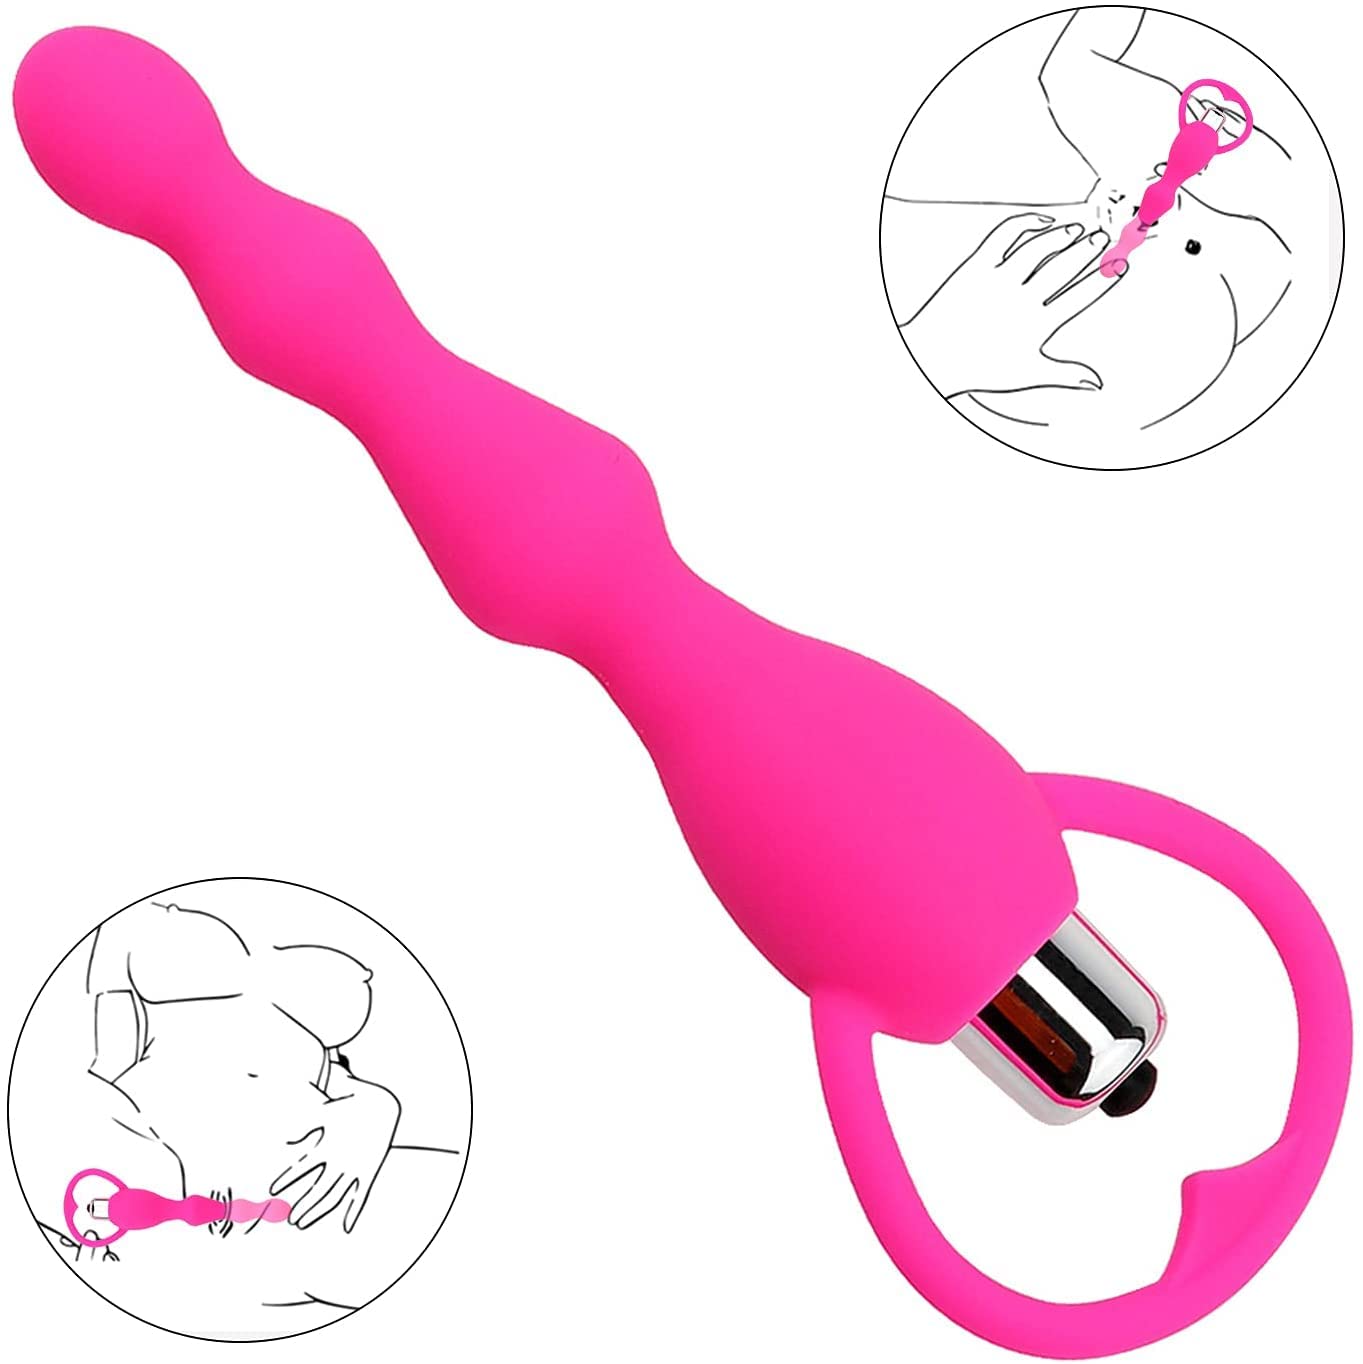 Bendable Silicone Vibrating Anal Beads Butt Plug Vibe Sex Toys for Men Women (3)